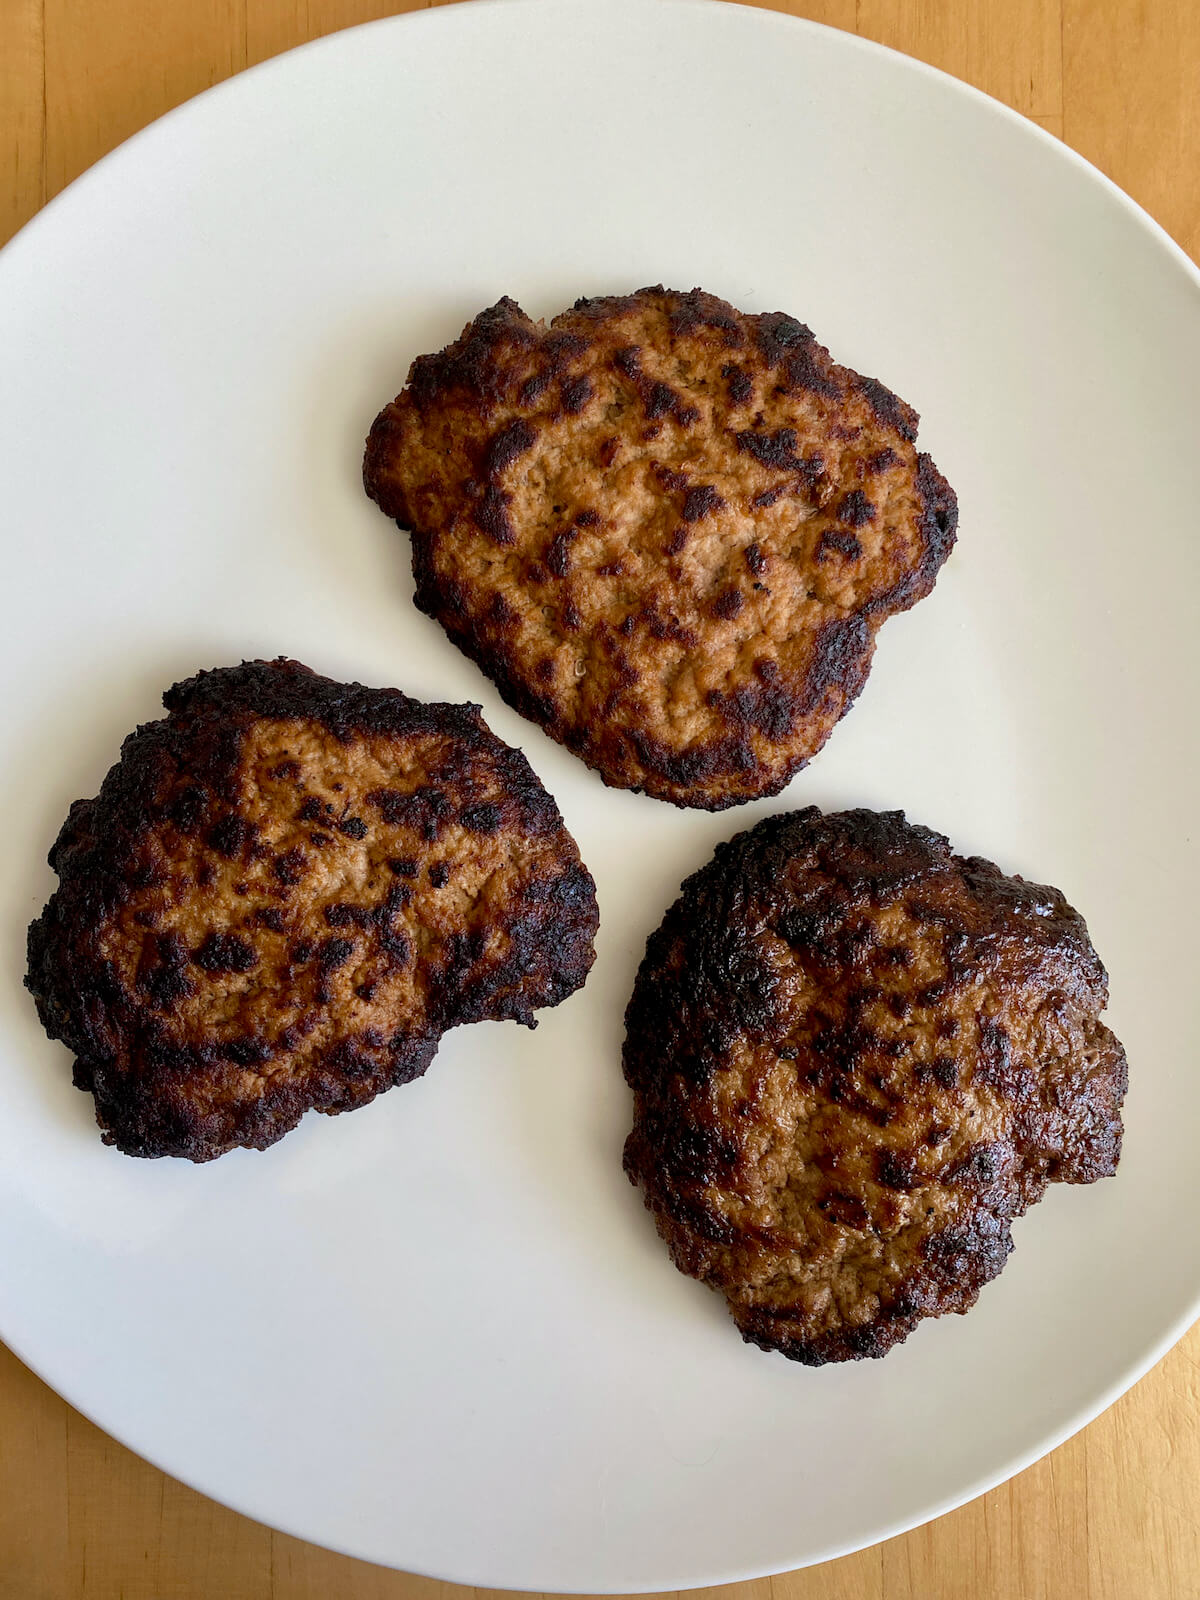 Three cooked turkey smash burgers on a white plate.